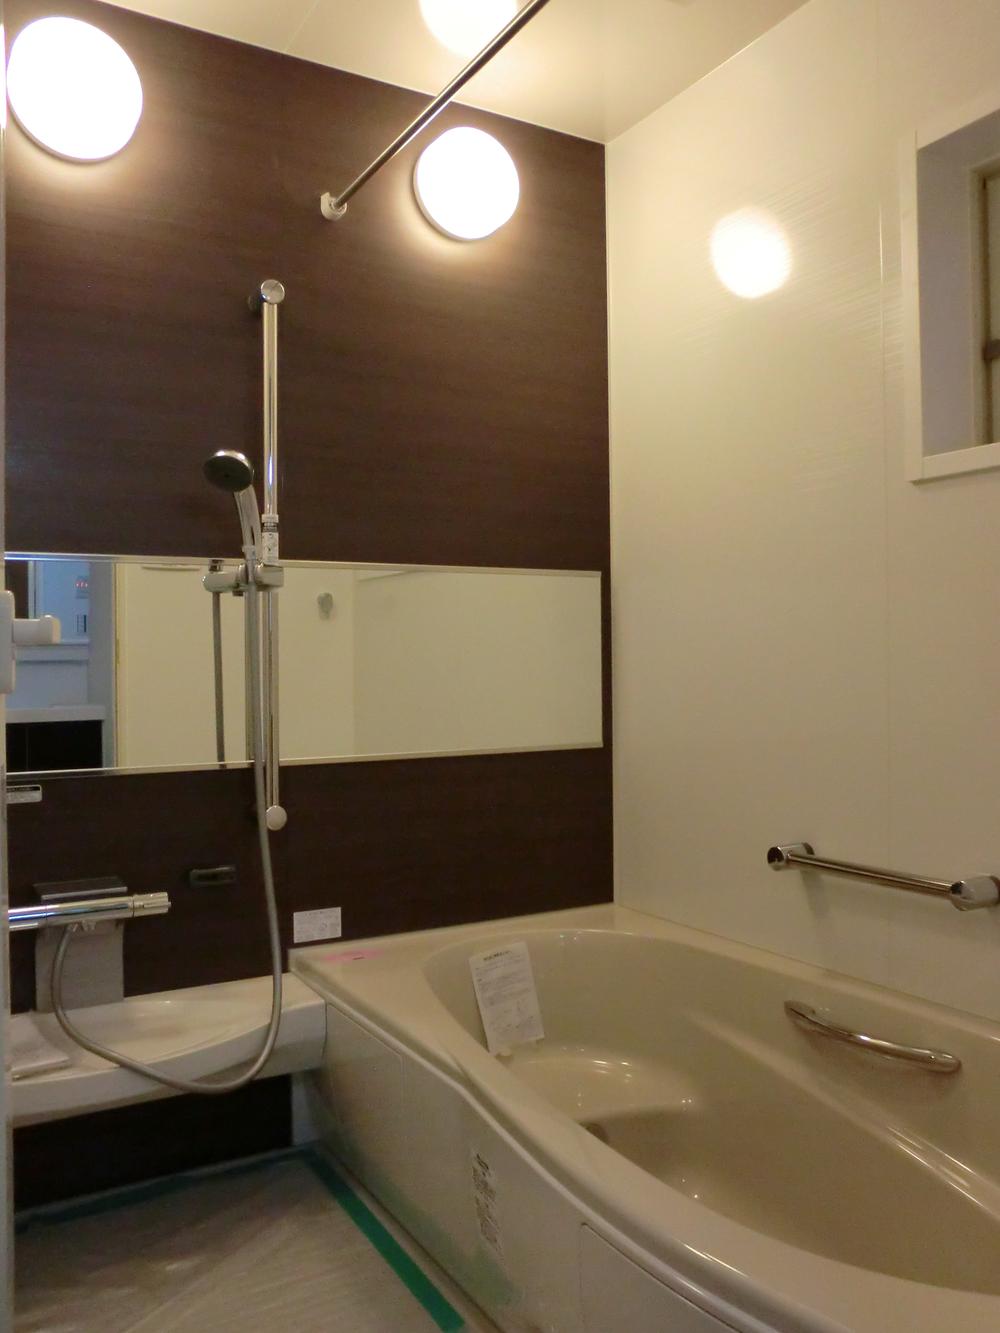 Same specifications photo (bathroom). Bathing of the same specification. With bathroom dryer at 1 pyeong type. Clean easy Kururin poi drainage port! 1616 spacious bathtub size, Hard to feel the cold floor = is thermo floor.